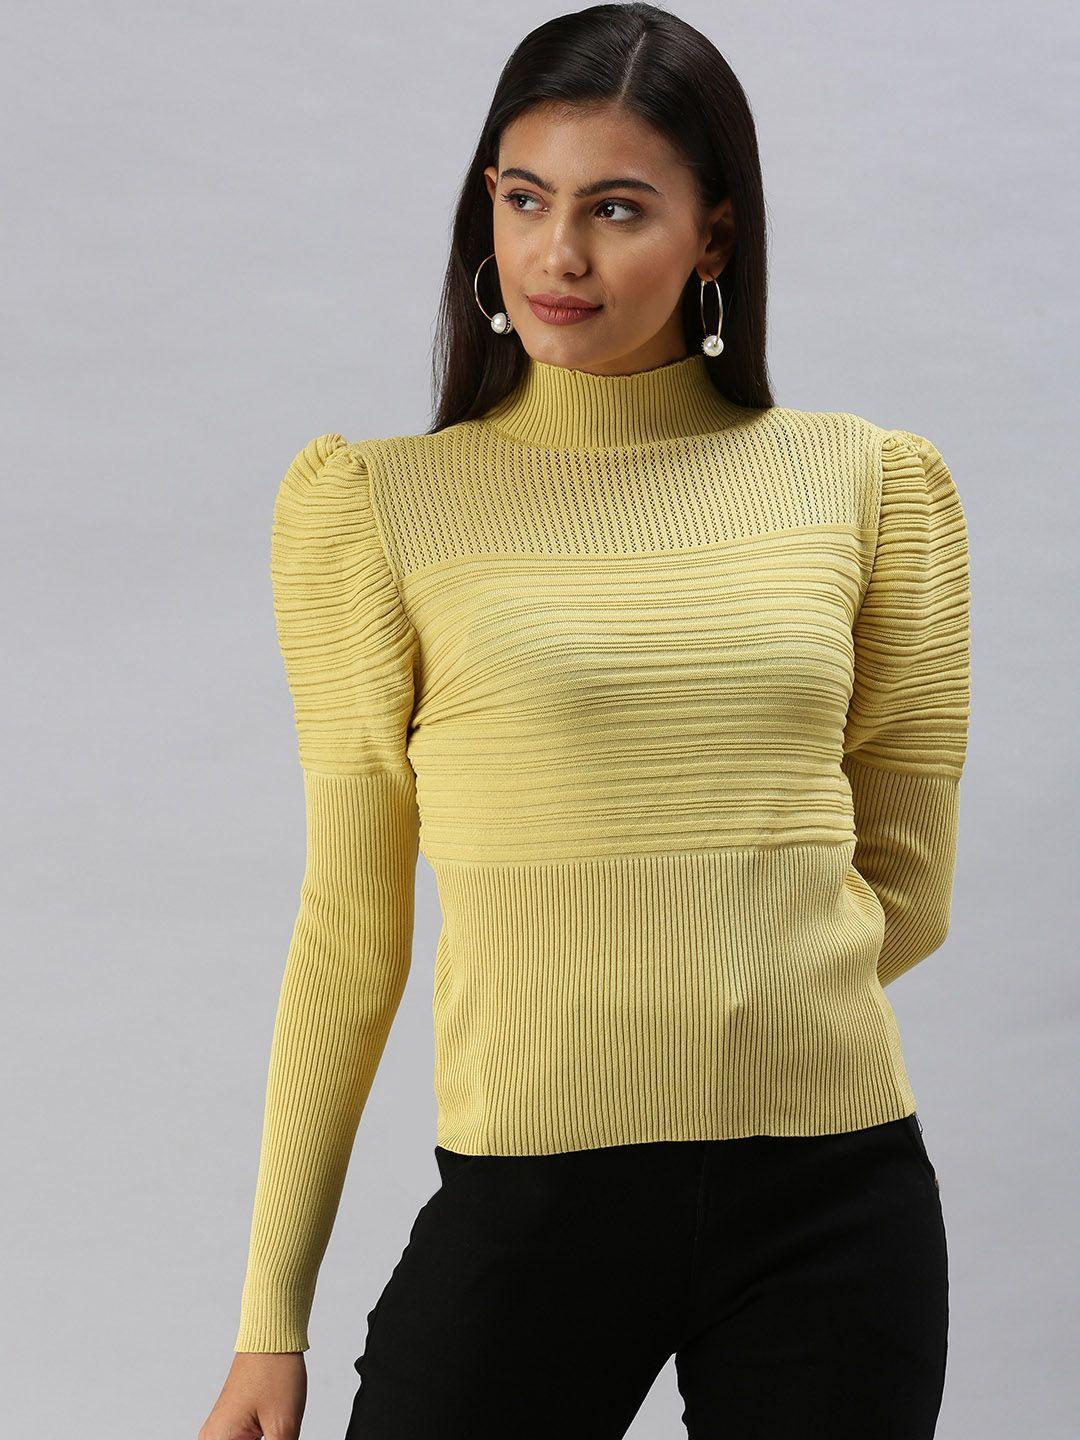 showoff yellow striped top